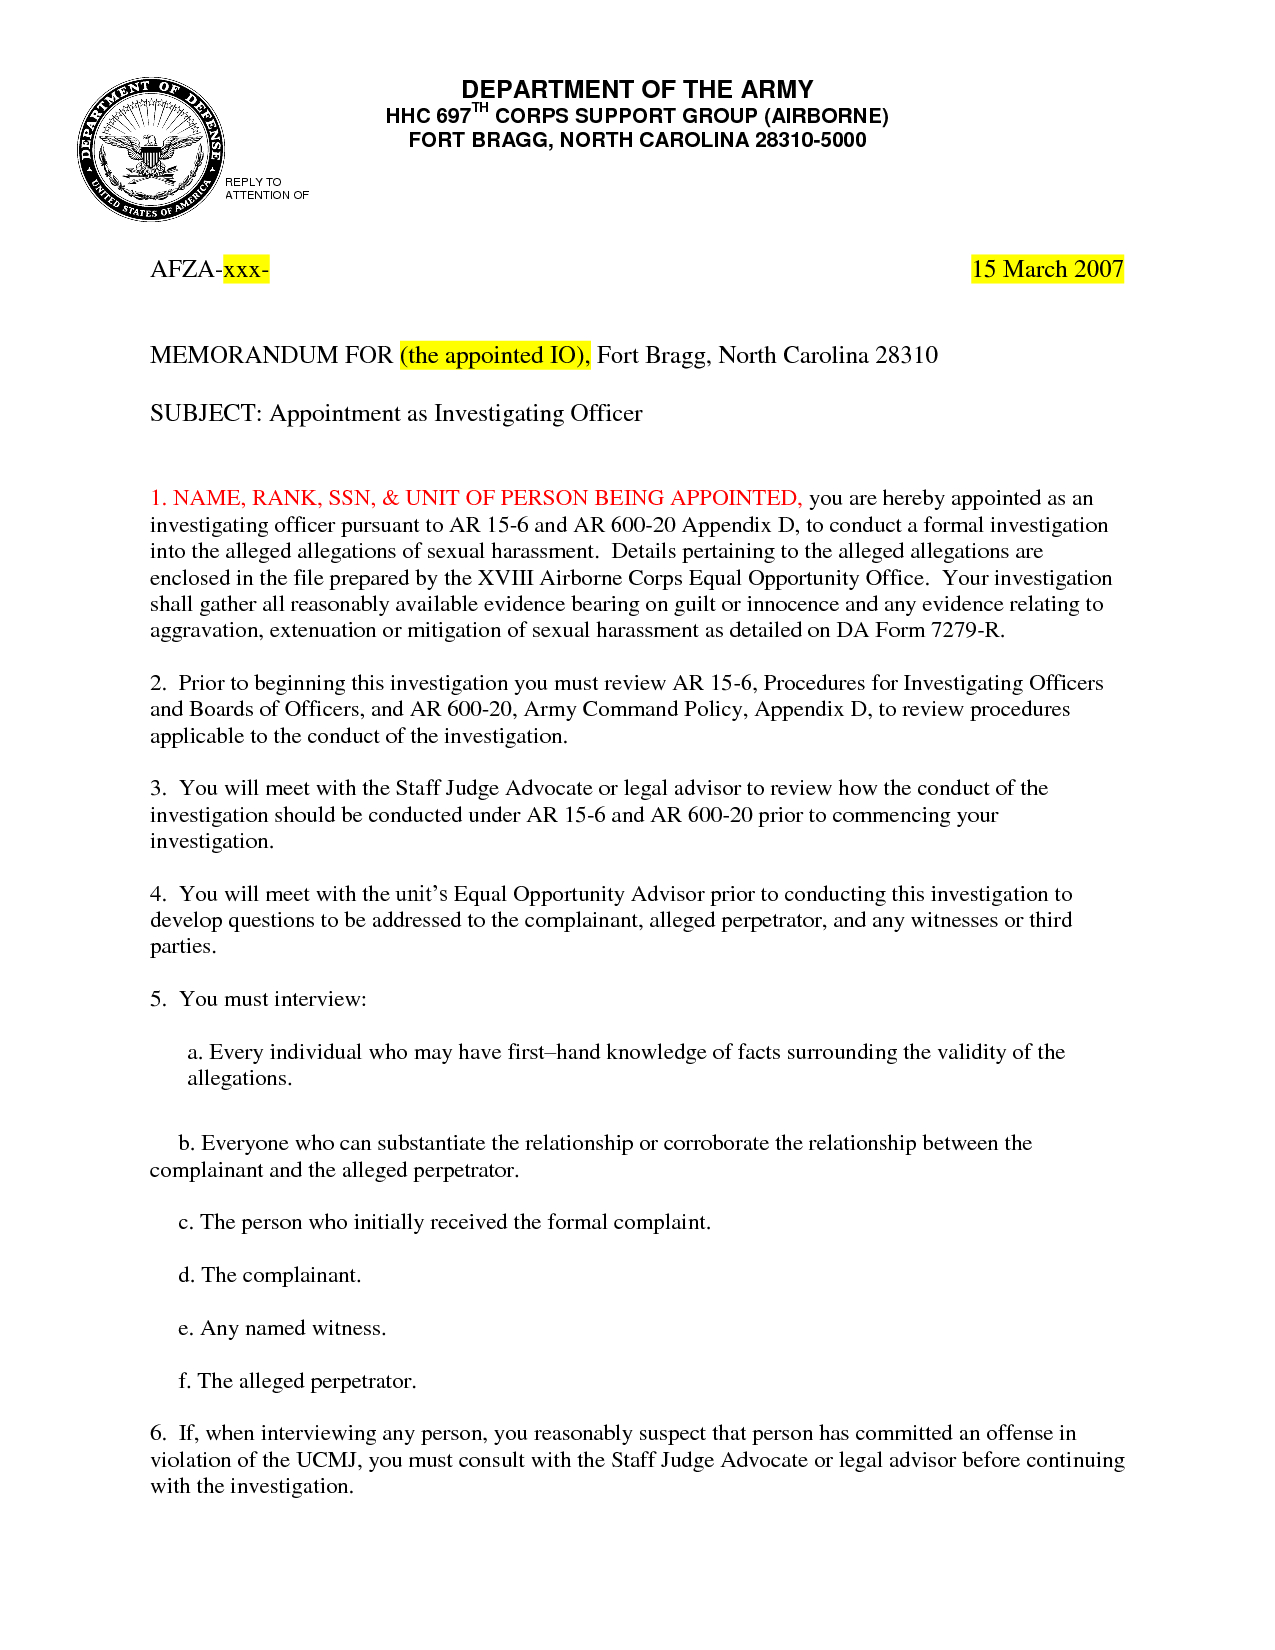 Army Memo Example Template | Free Cover Letter Templates Regarding Army Memorandum Template Word